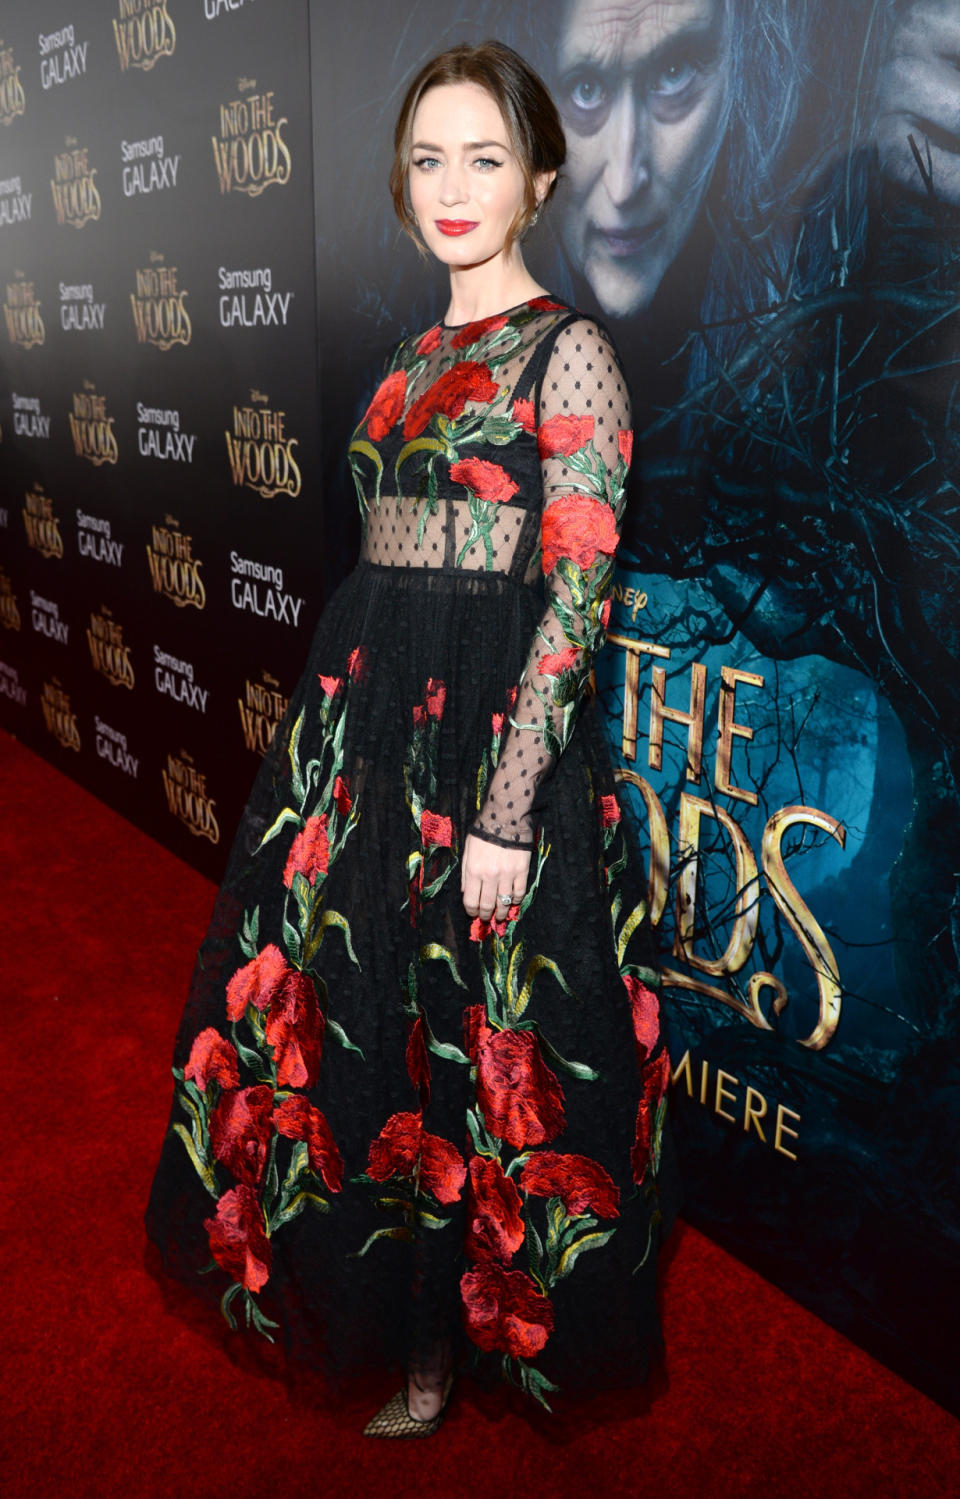 Blooming in a Dolce & Gabbana gown, Mrs. Blunt looked ravishing at the premiere of her film, 'Into the Woods in New York City.